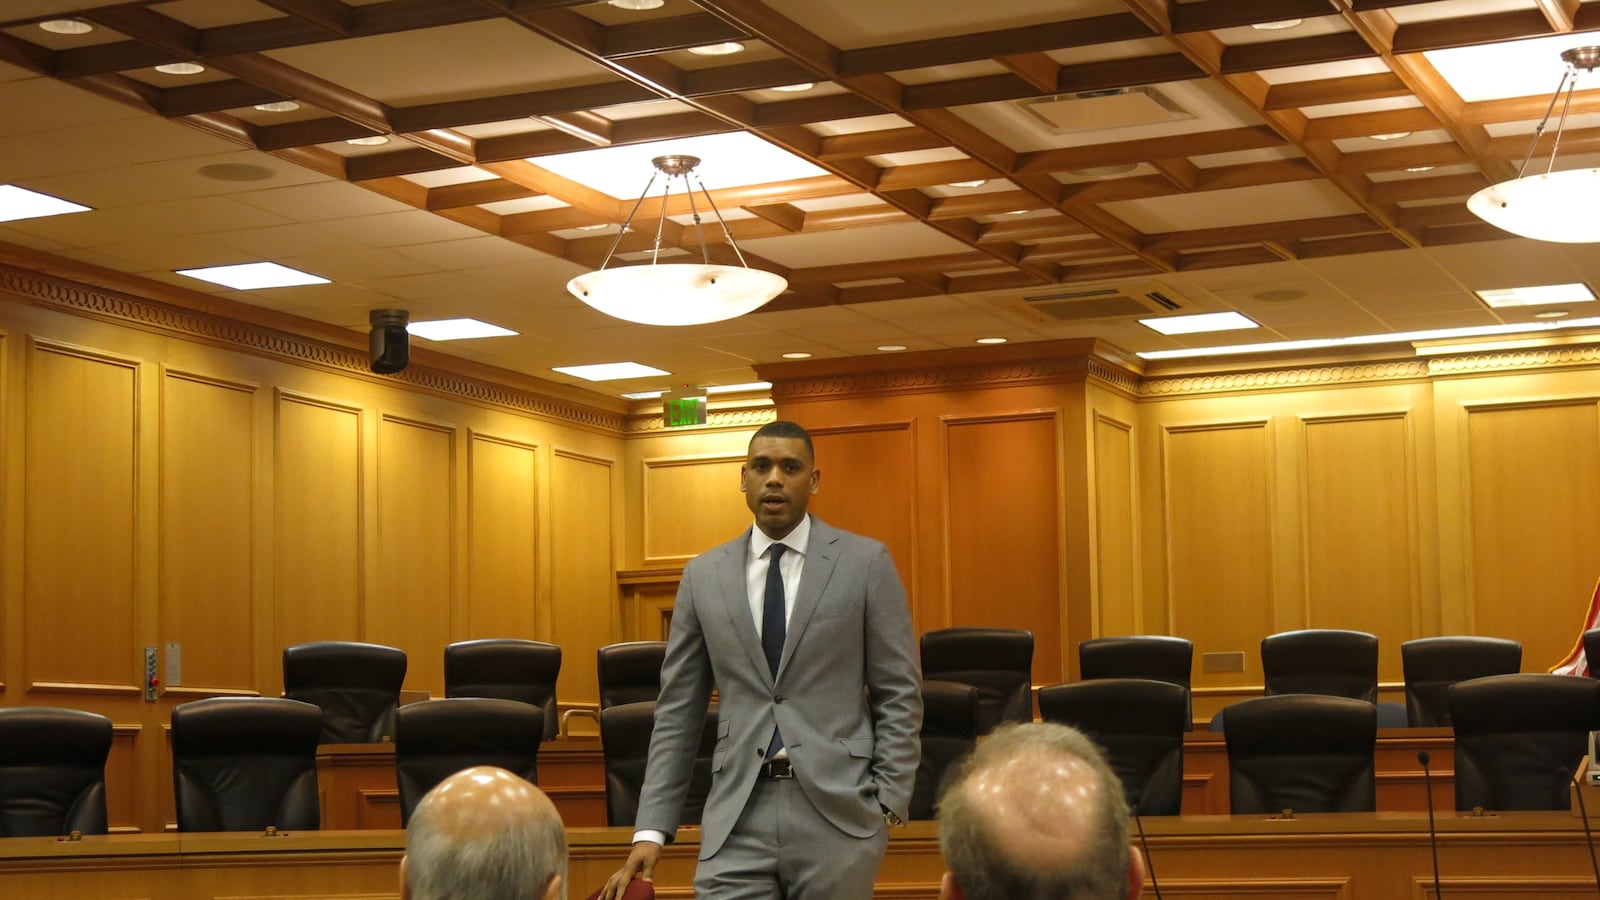 Allan Houston, a former University of Tennessee and New York Knicks basketball player, speaks to legislators about school choice.